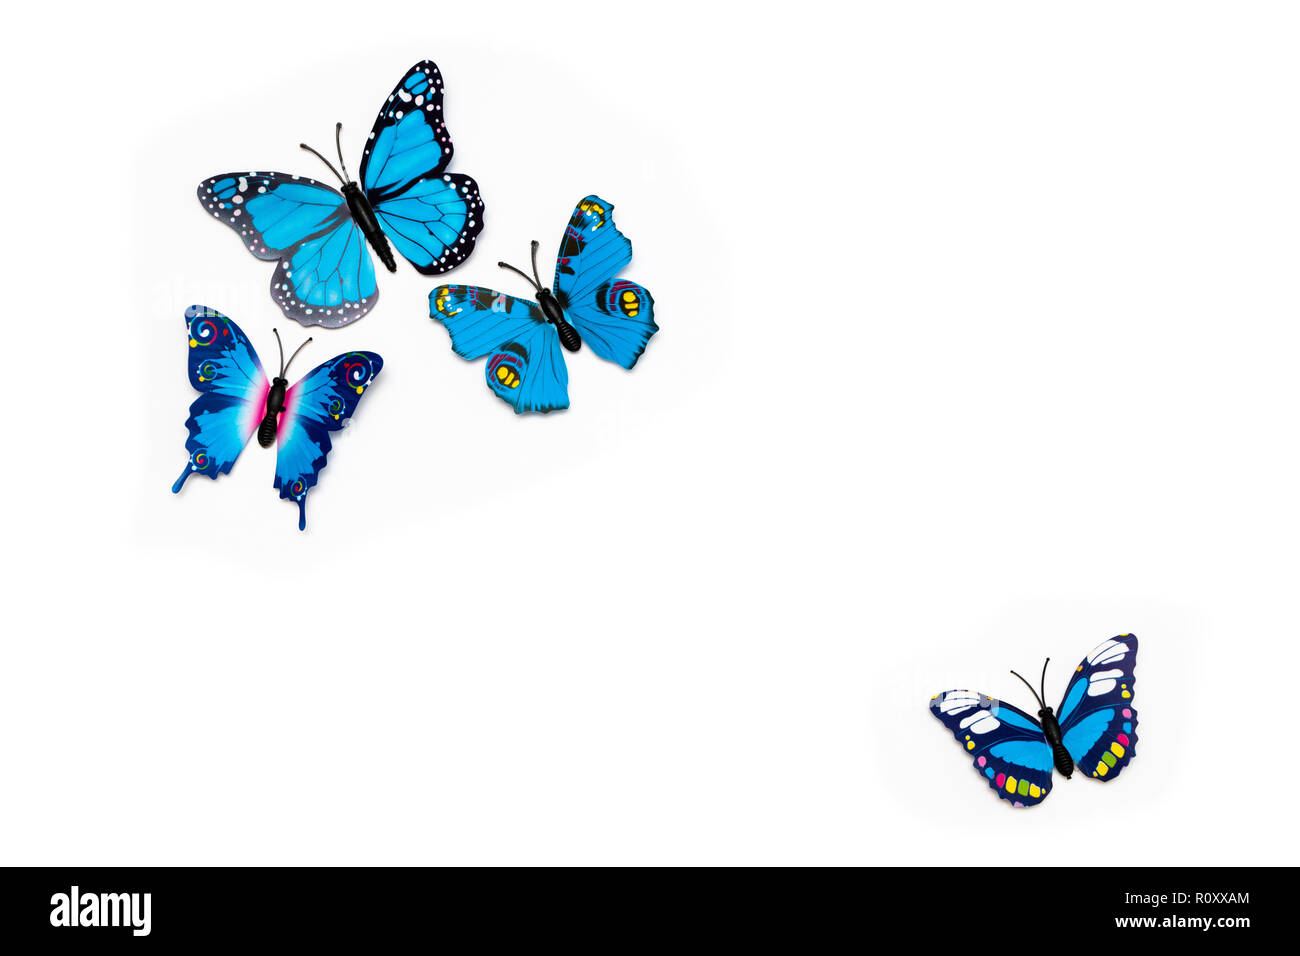 Group of multicolored tropical butterflies isolated on white background Stock Photo